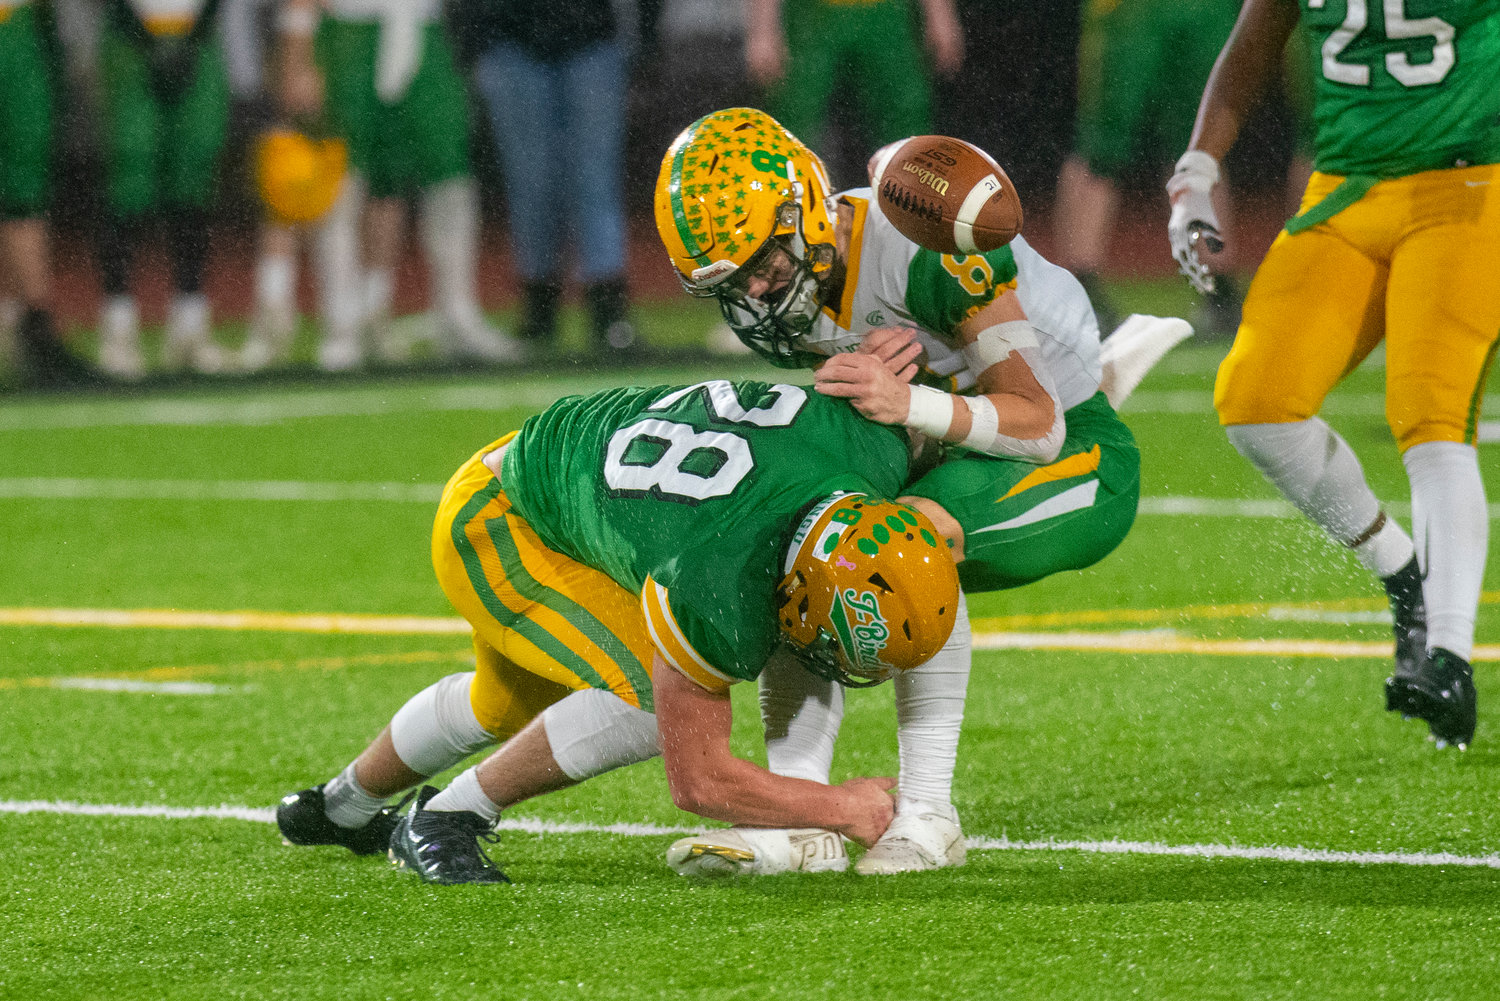 Tumwater’s Ryan Orr (28) delivers a hit to Lynden receiver Isaiah Stanley (8) during the 2A state title game on Dec. 4.